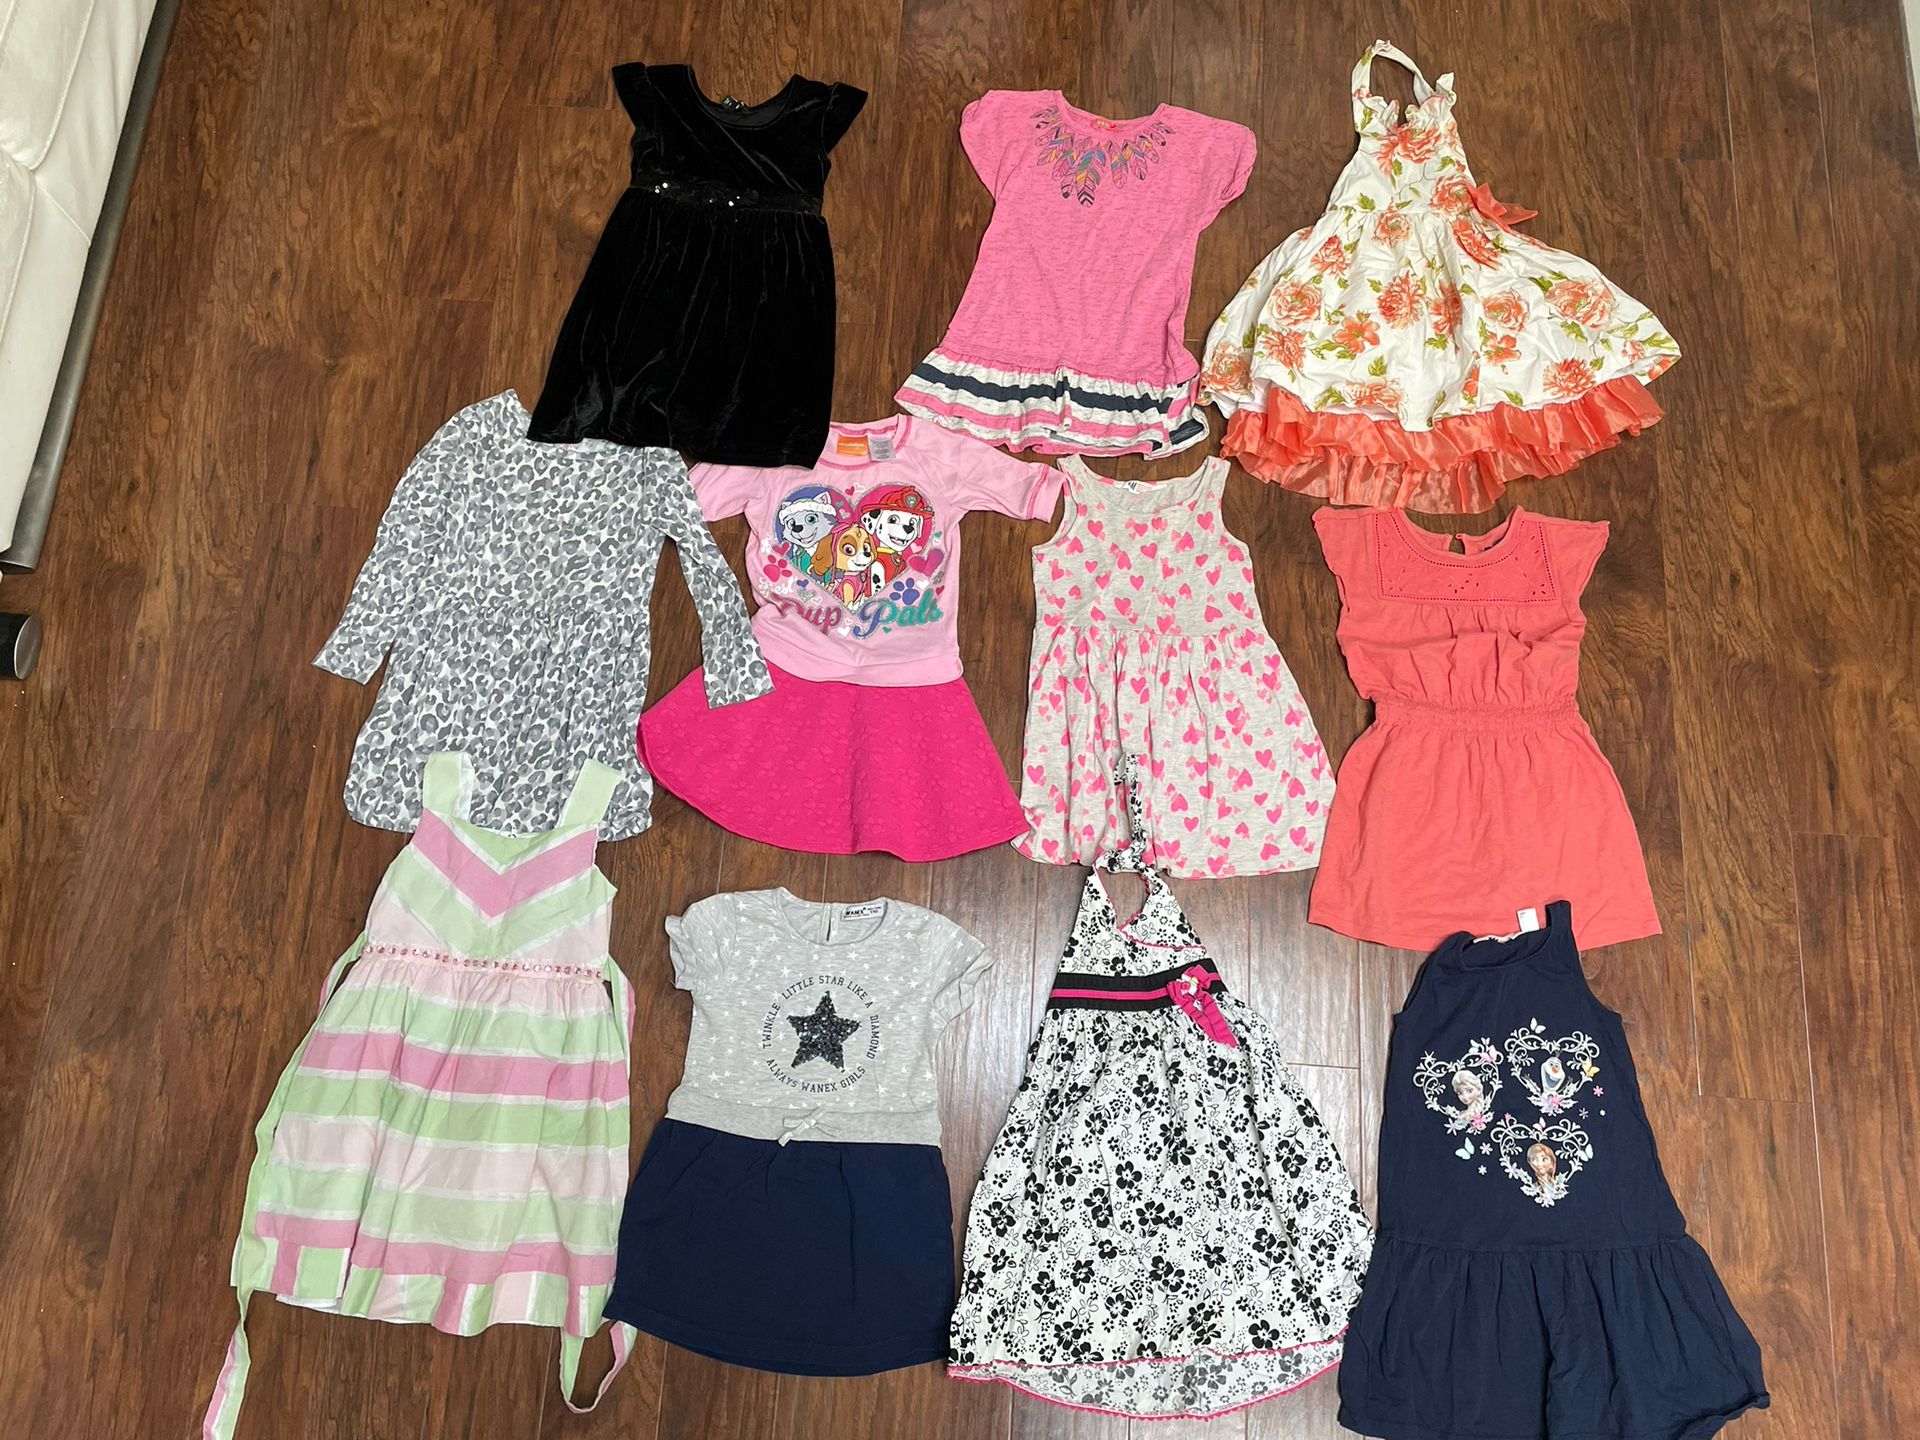 Set Of 11 Girls Toddler Dresses Sz 4-5 Or 5T Pretty Summer Spring Outfit